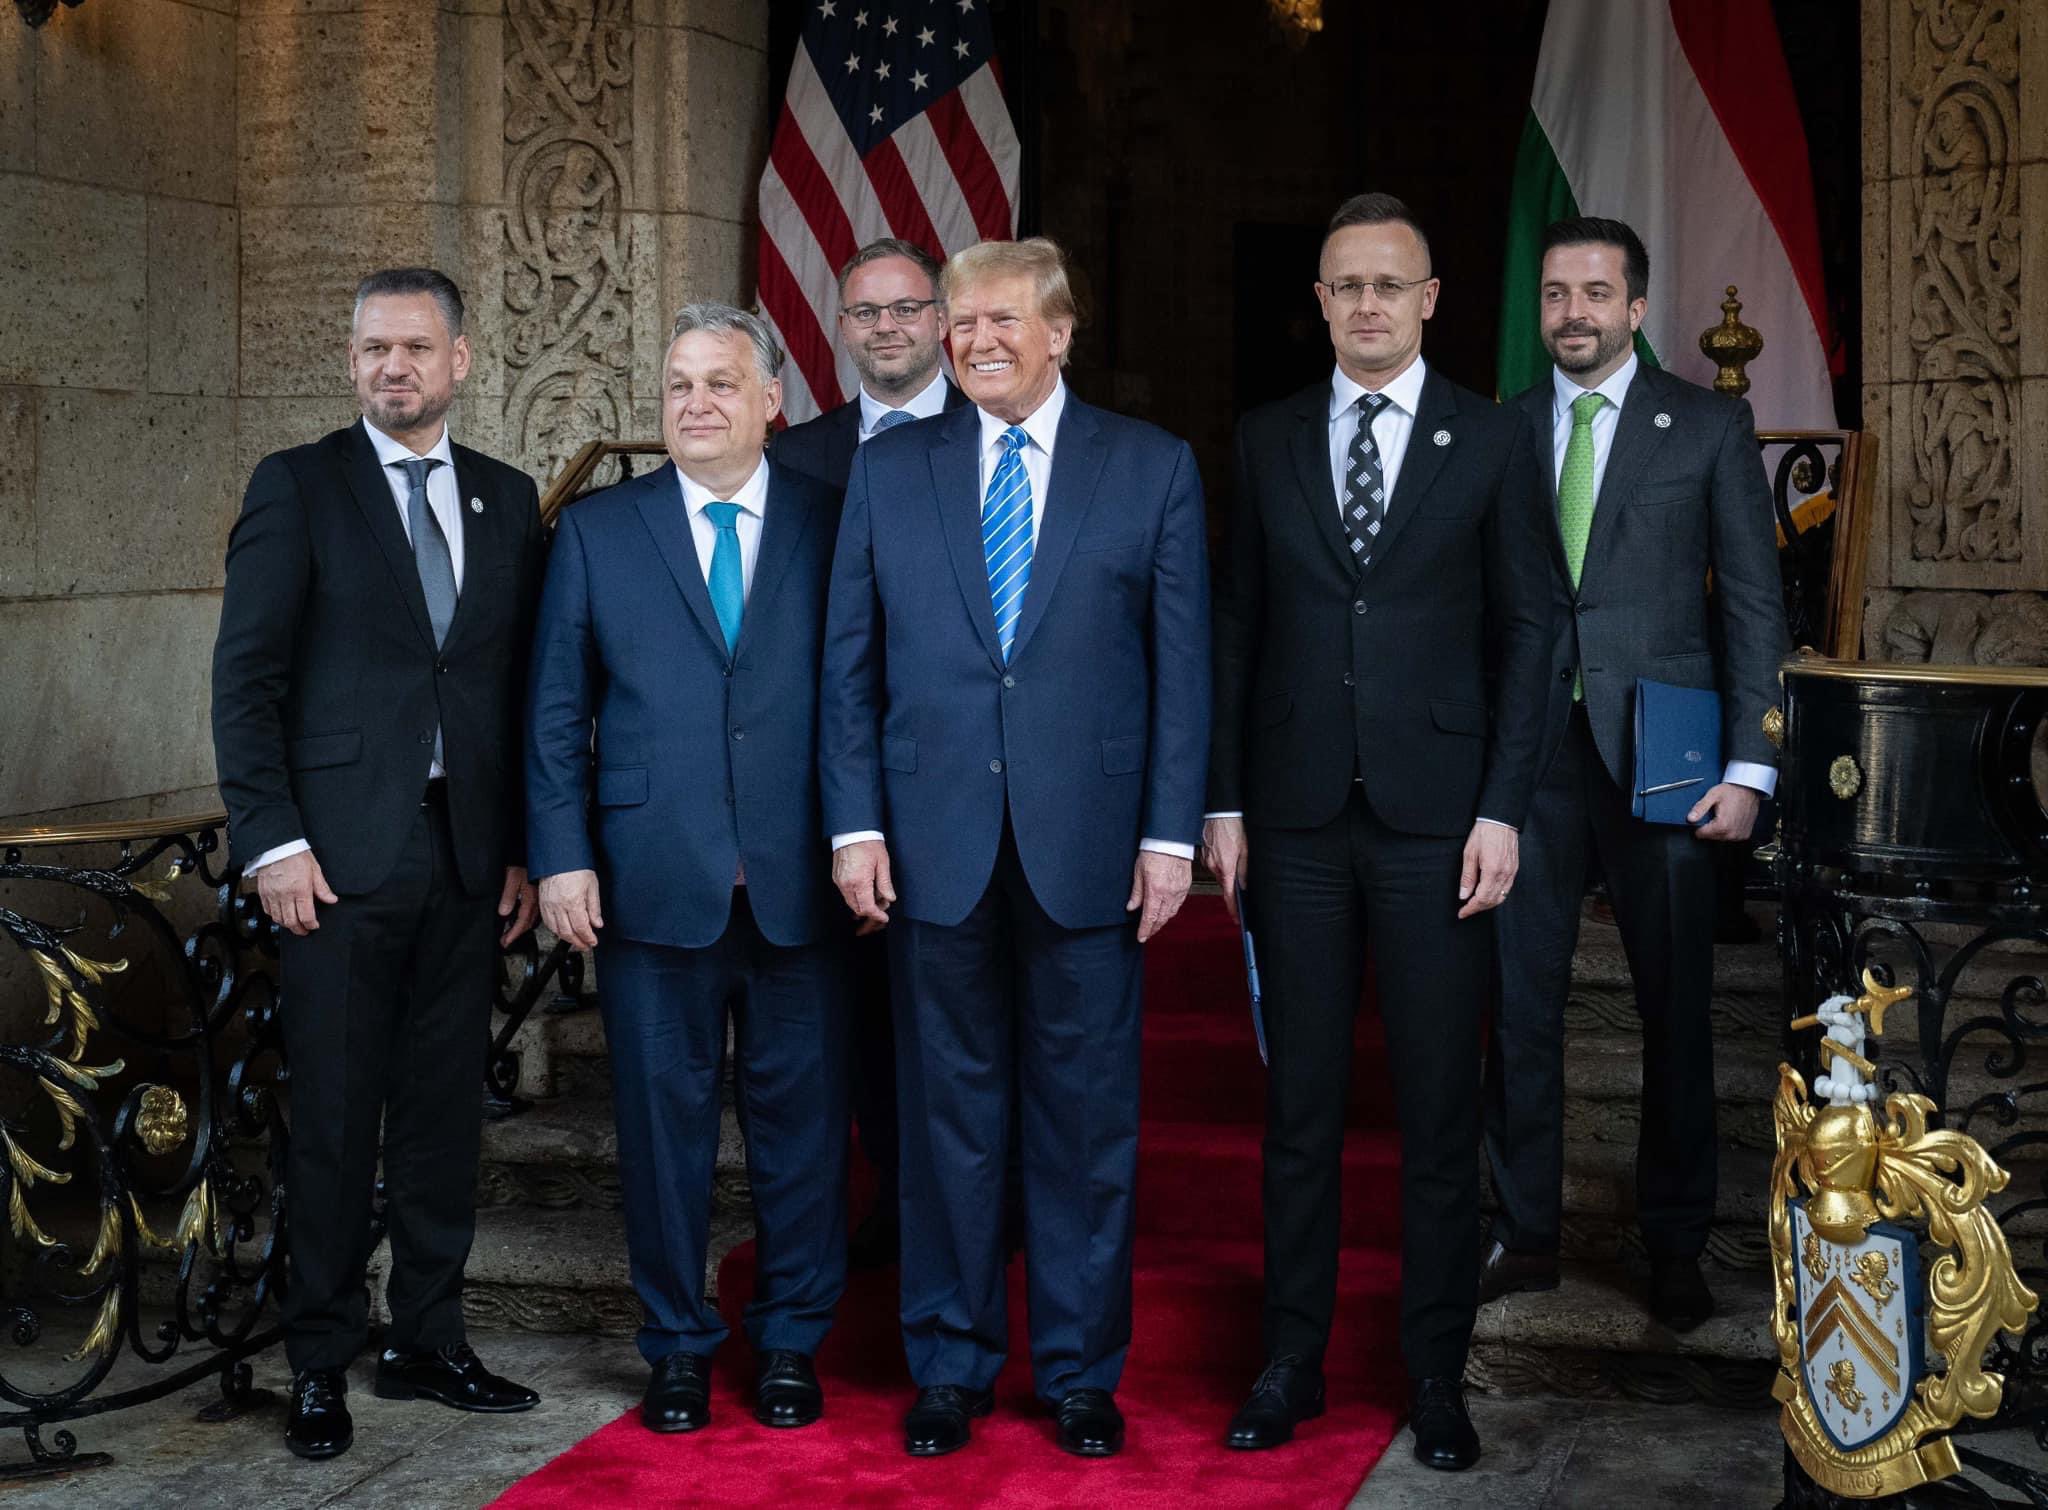 President Donald Trump with Hungarian Prime Minister Viktor Orbán